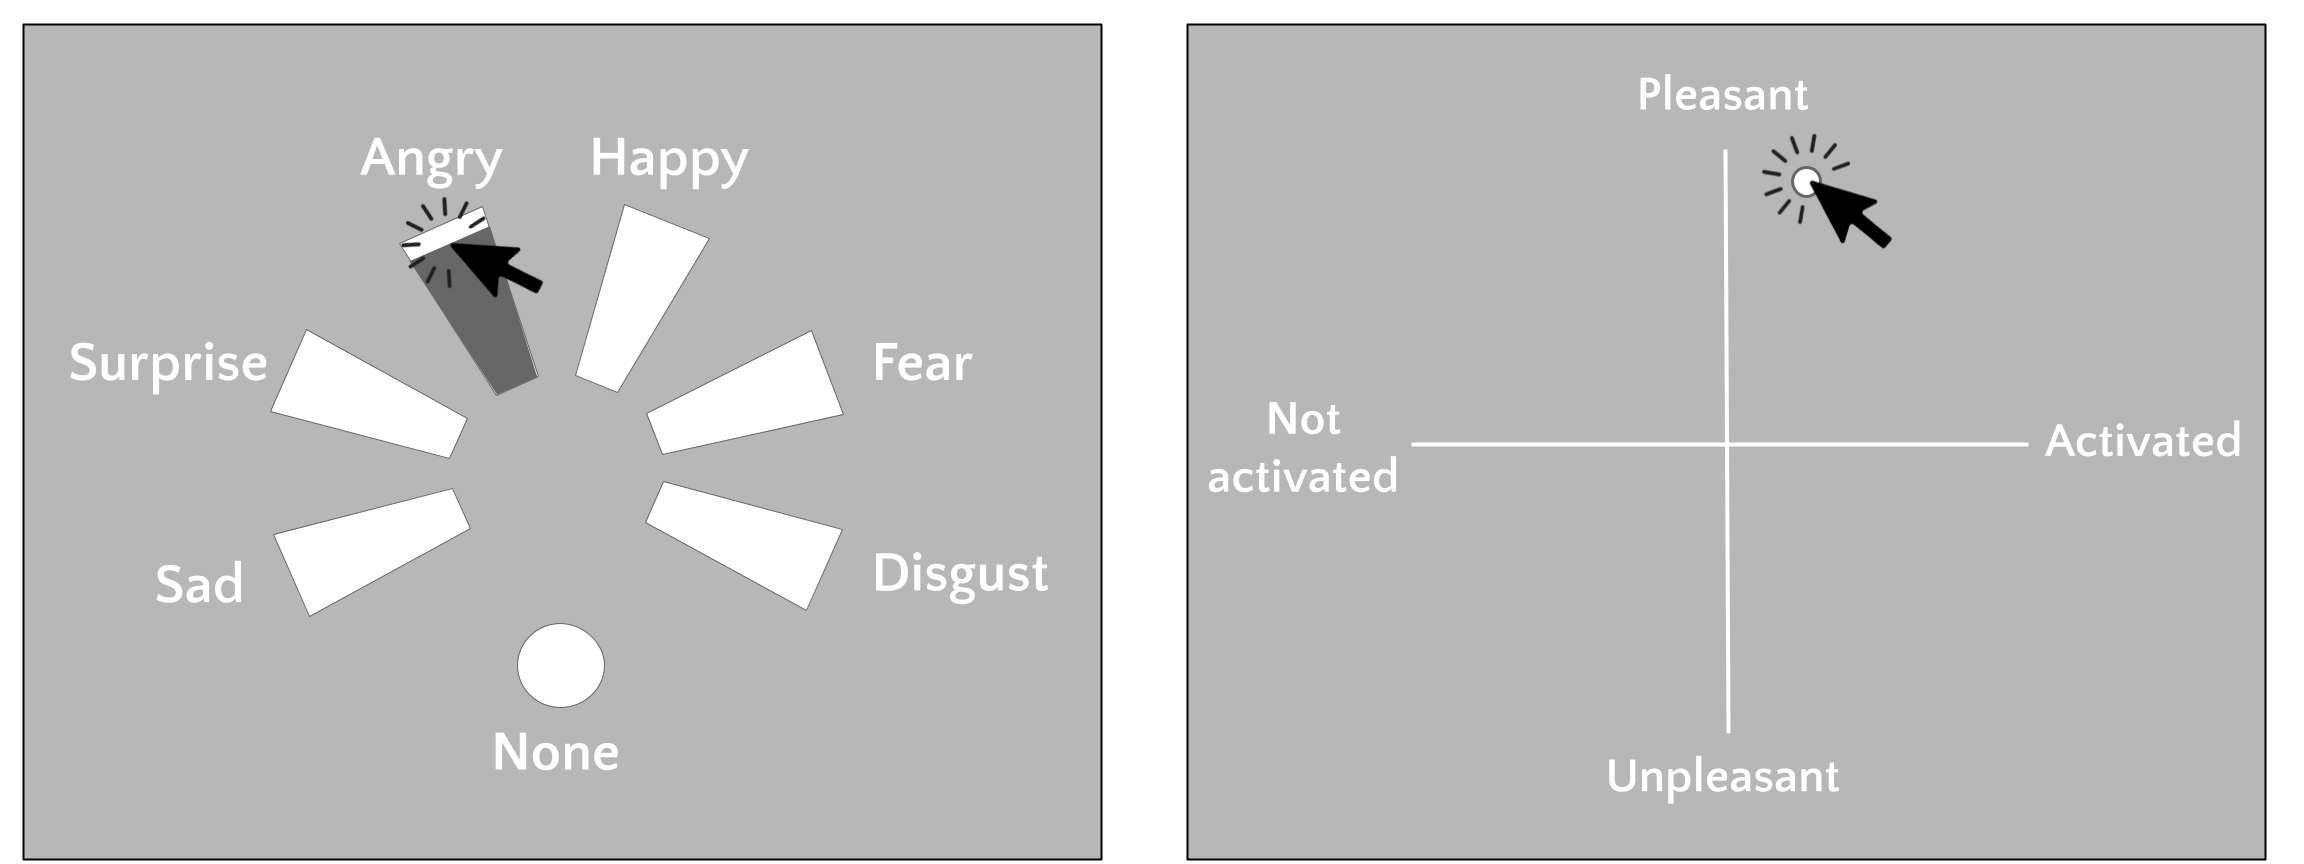 Prompts for categorical emotion ratings (left) and valence/arousal ratings (right).